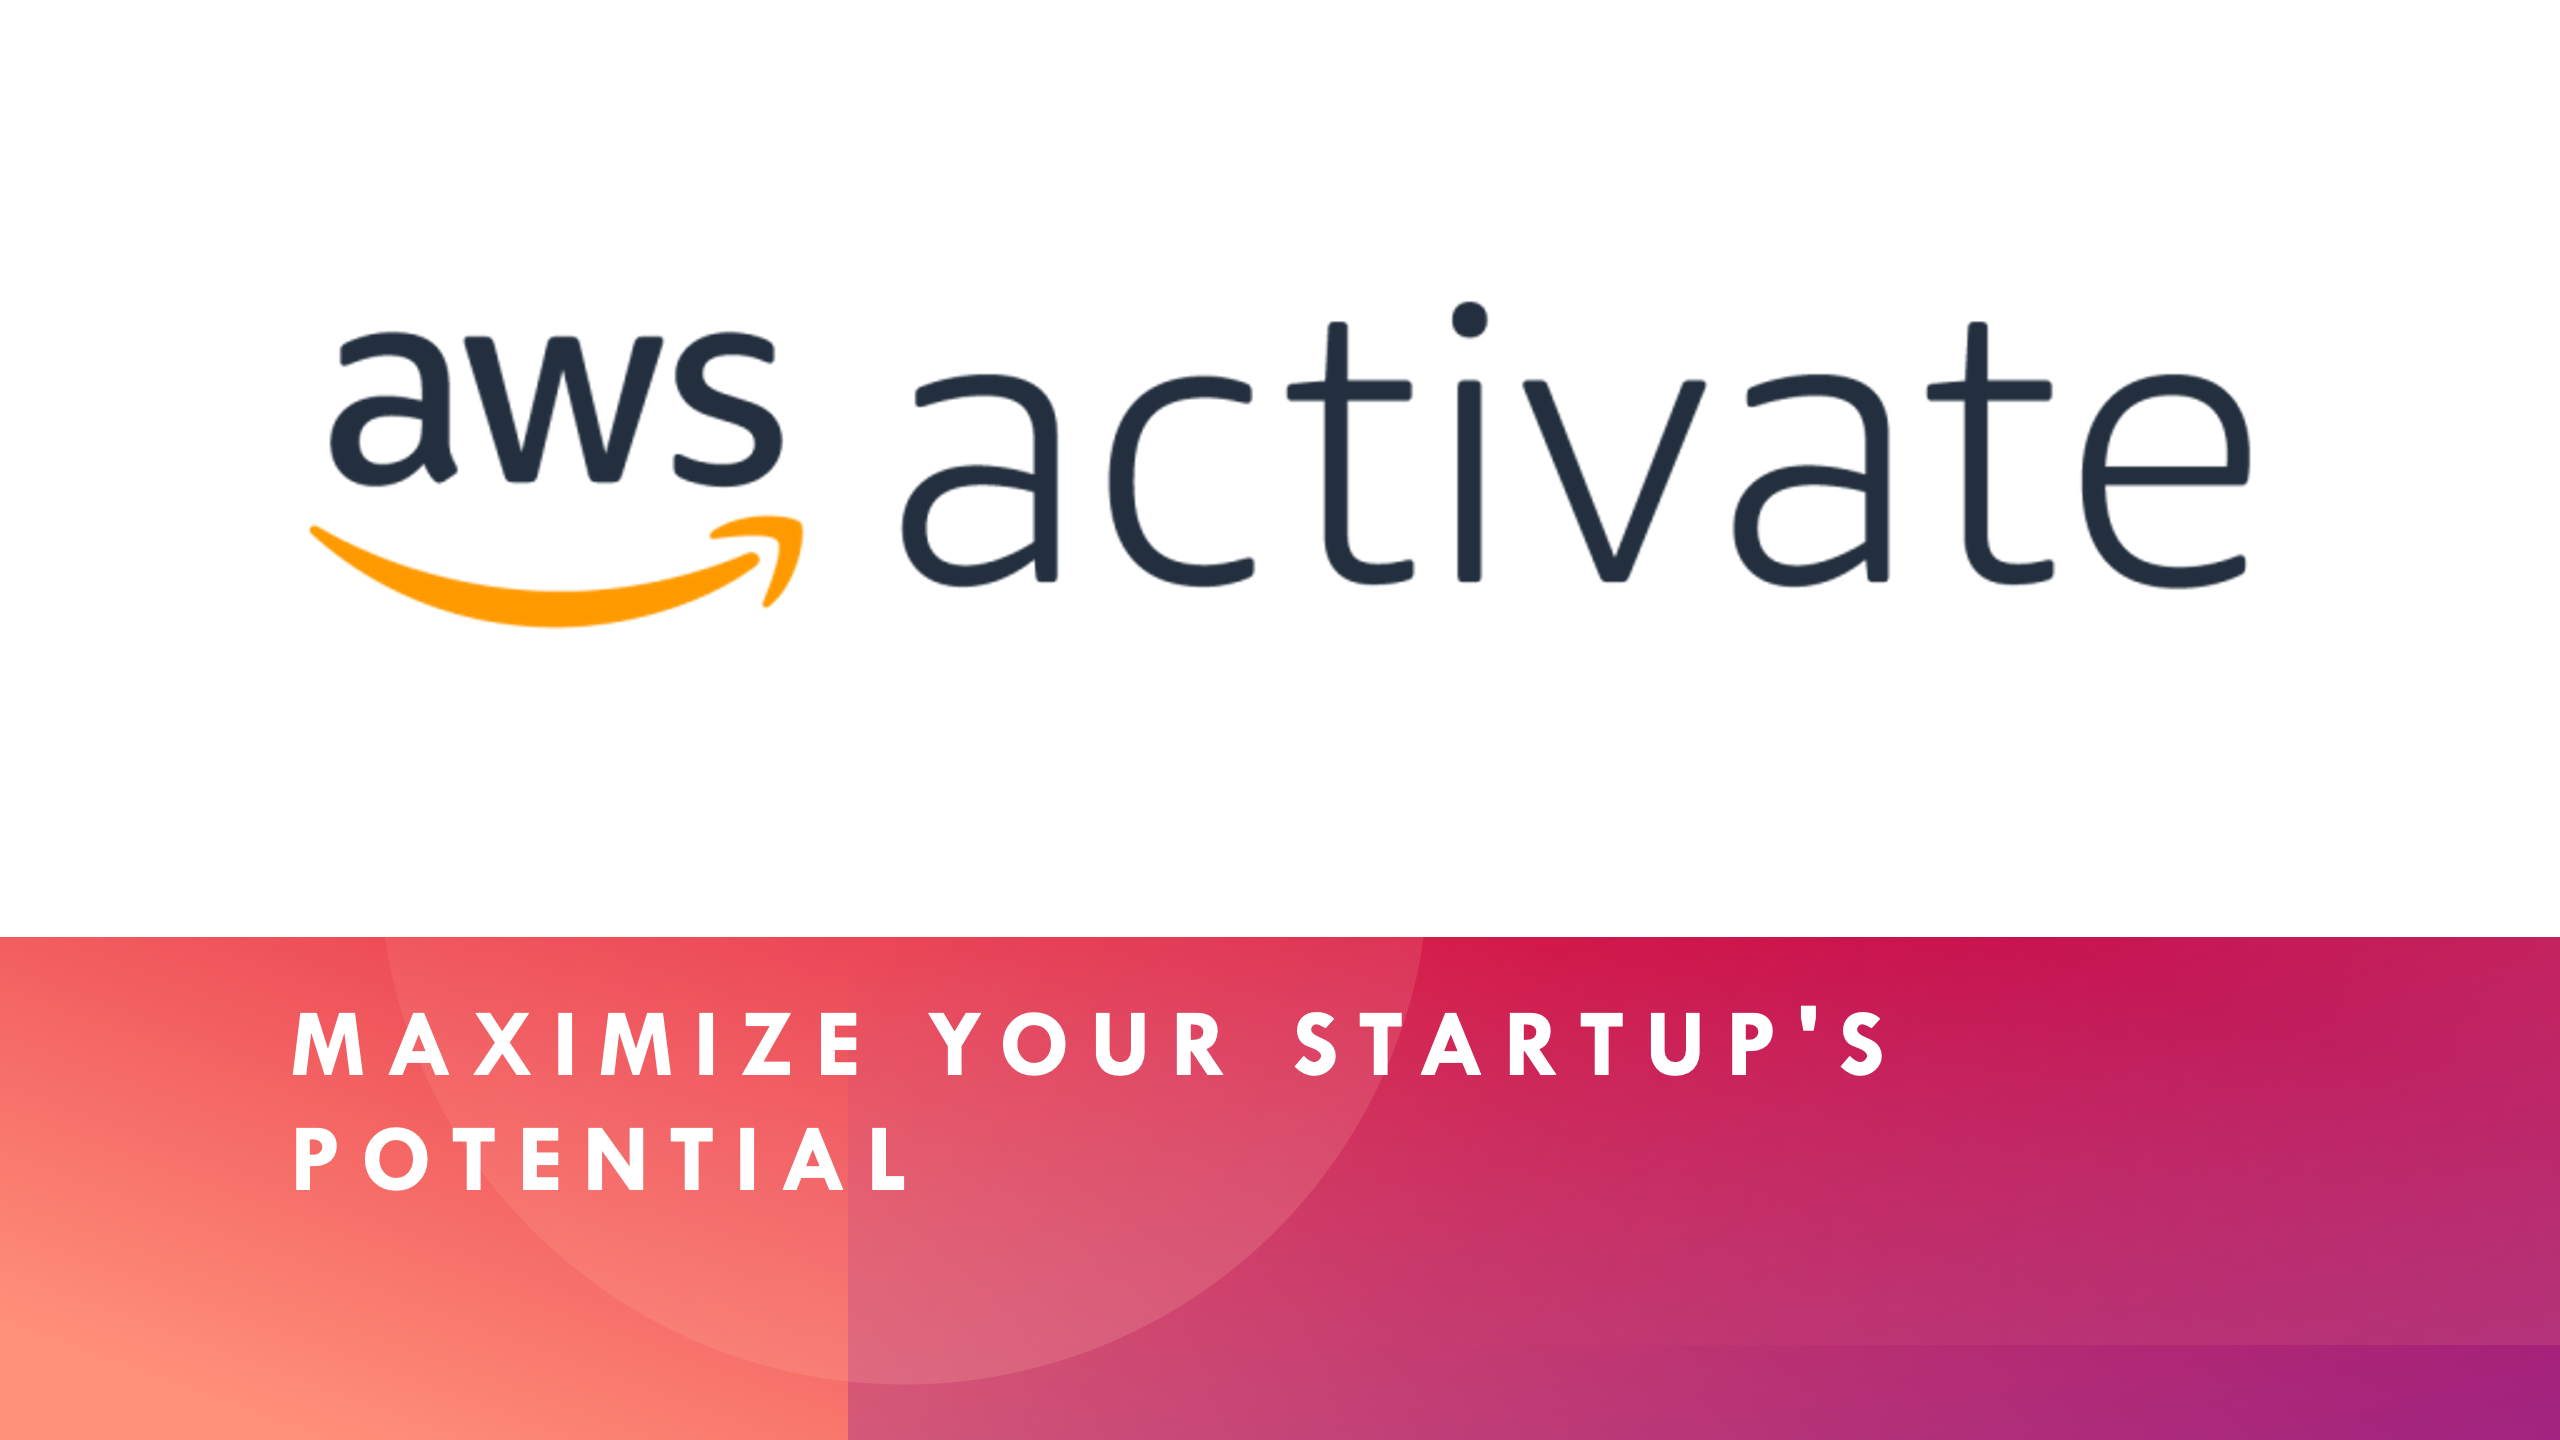 AWS Activate - Maximize Your Startup Potential